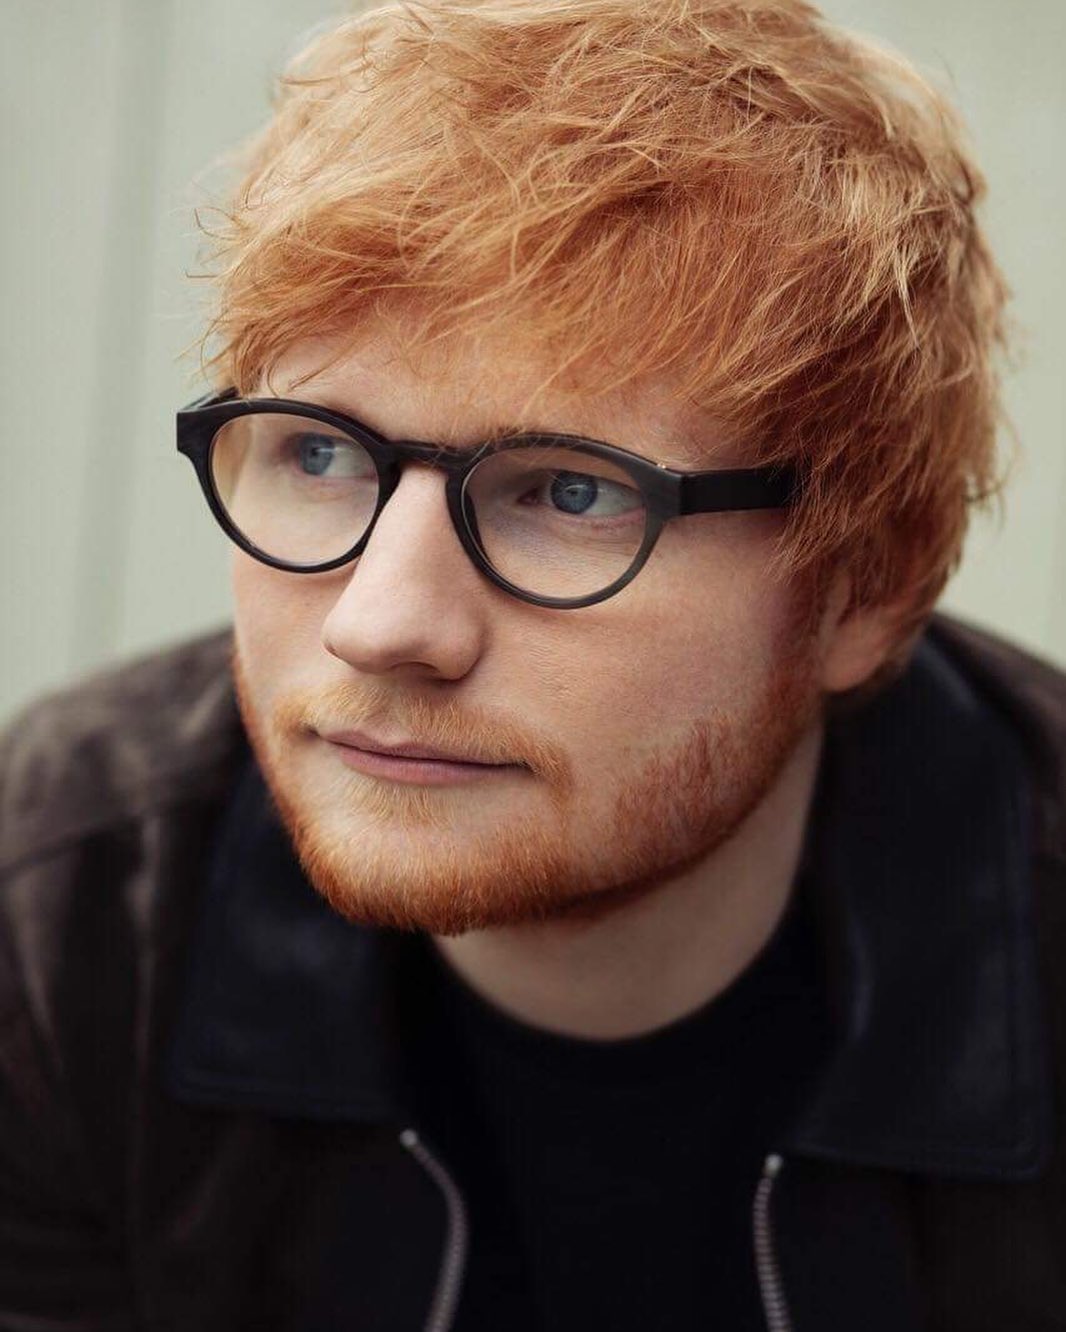 A picture of Ed Sheeran